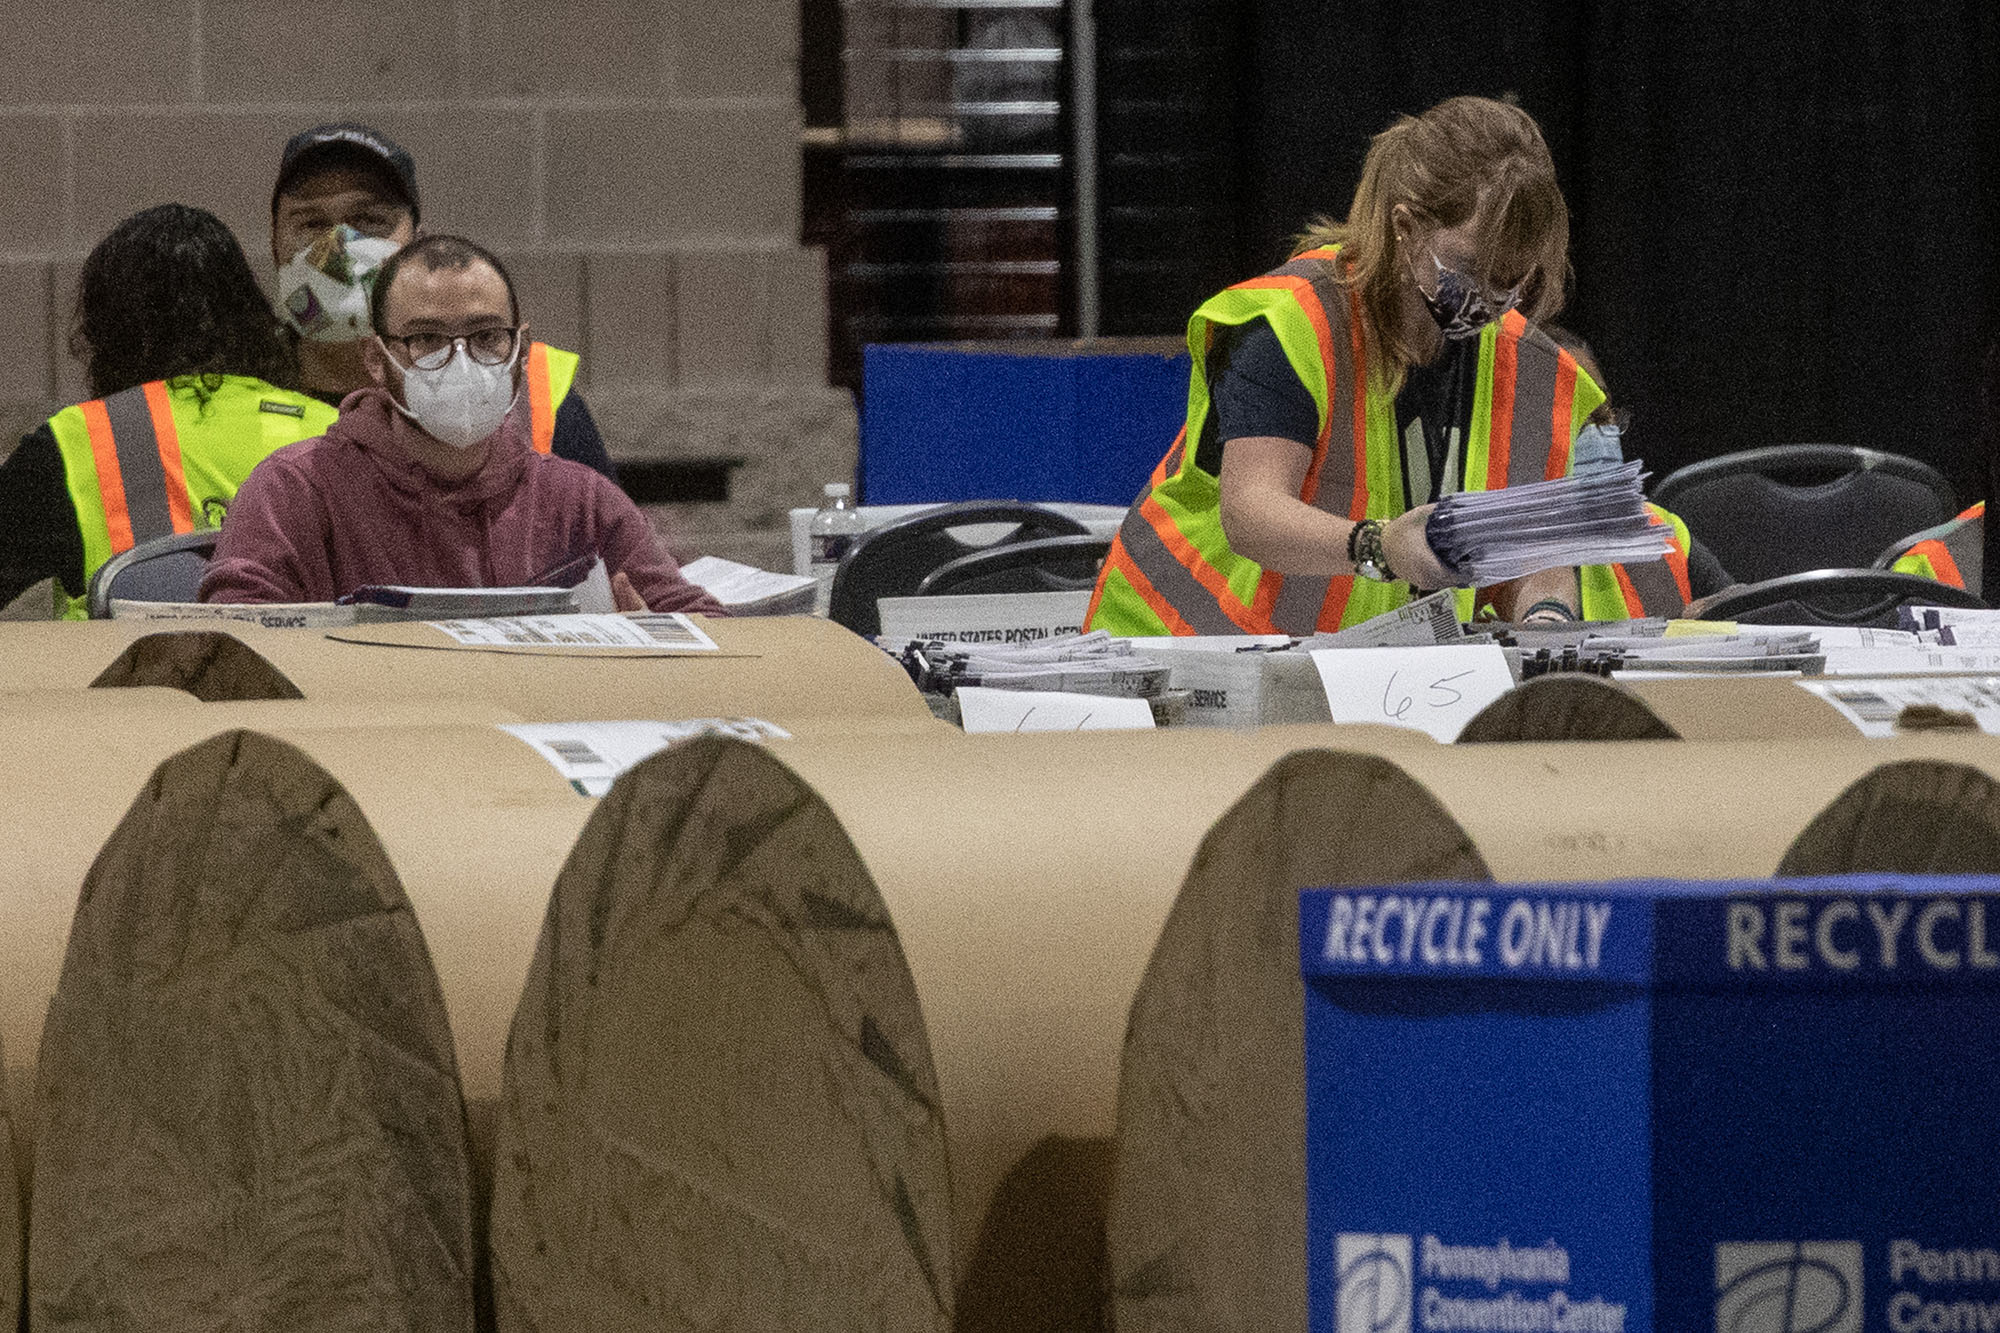 Election workers count ballots at the Philadelphia Convention Center on November 6, 2020 in Philadelphia, Pennsylvania. 